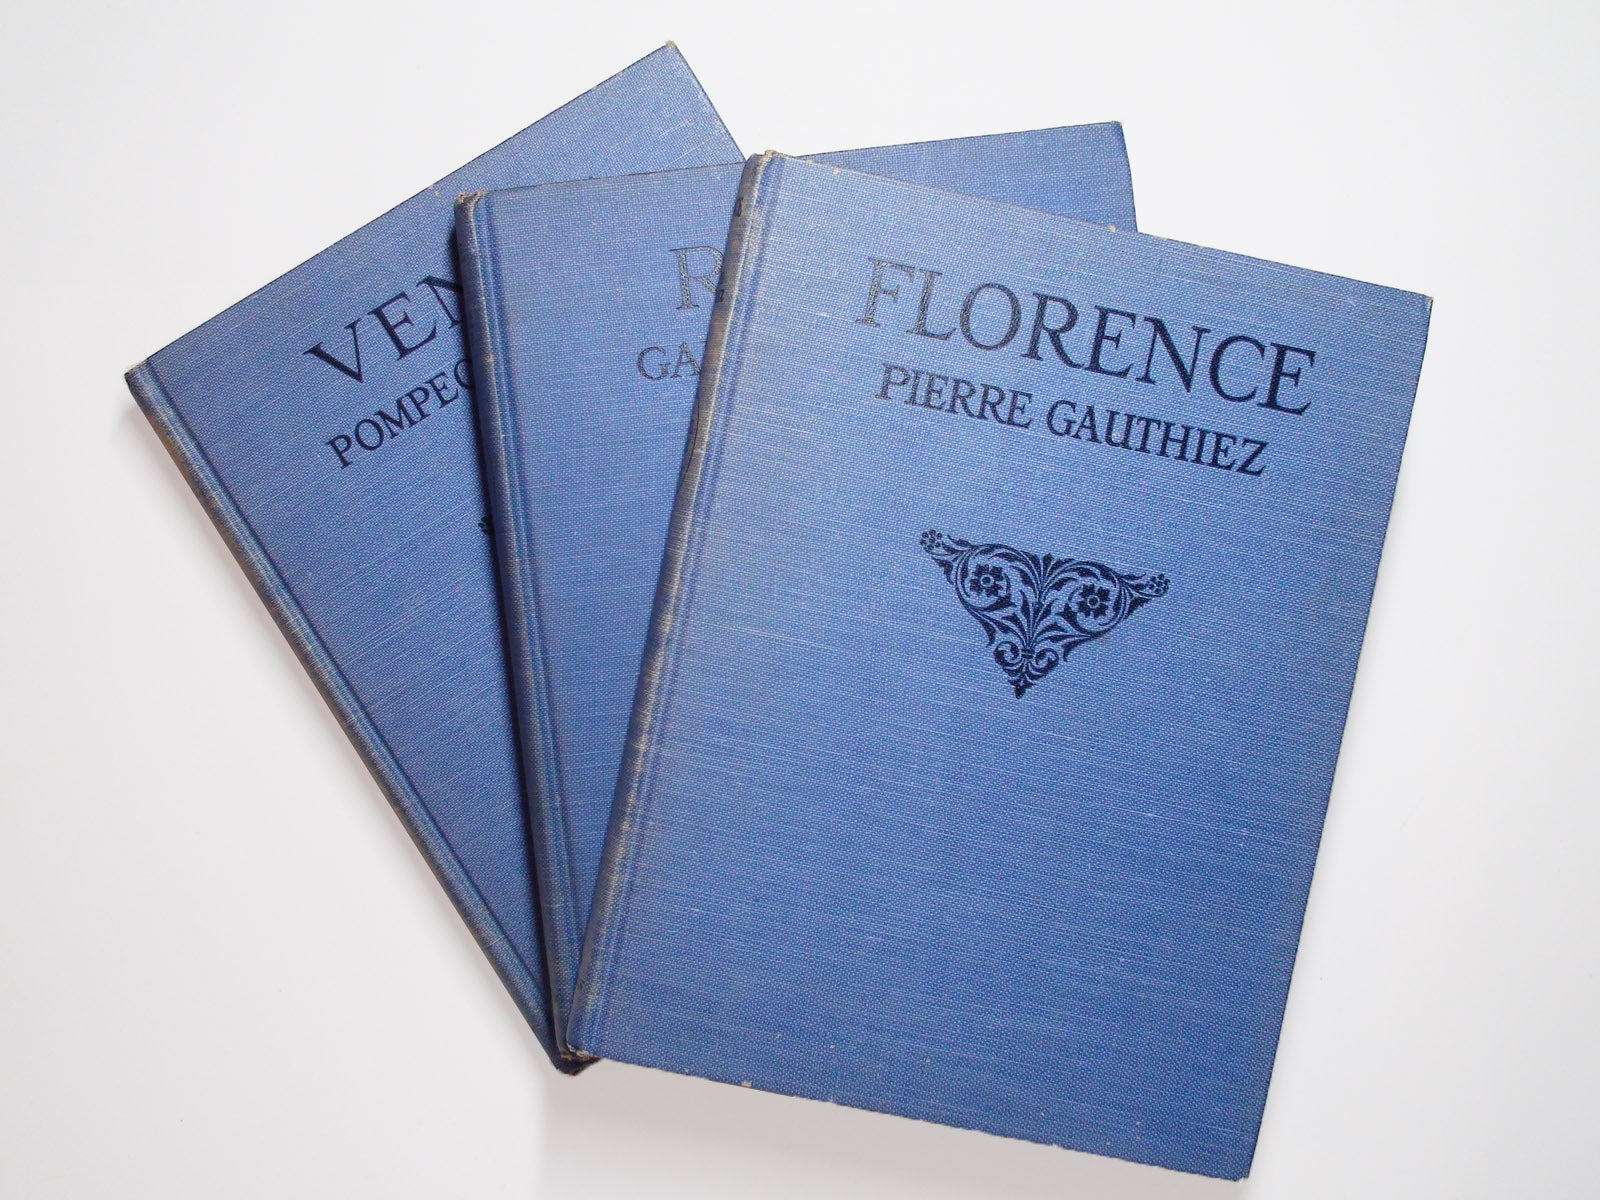 Travel Lover's Library, 3 Volumes, Venice, Florence, Rome, Illustrated, 1926